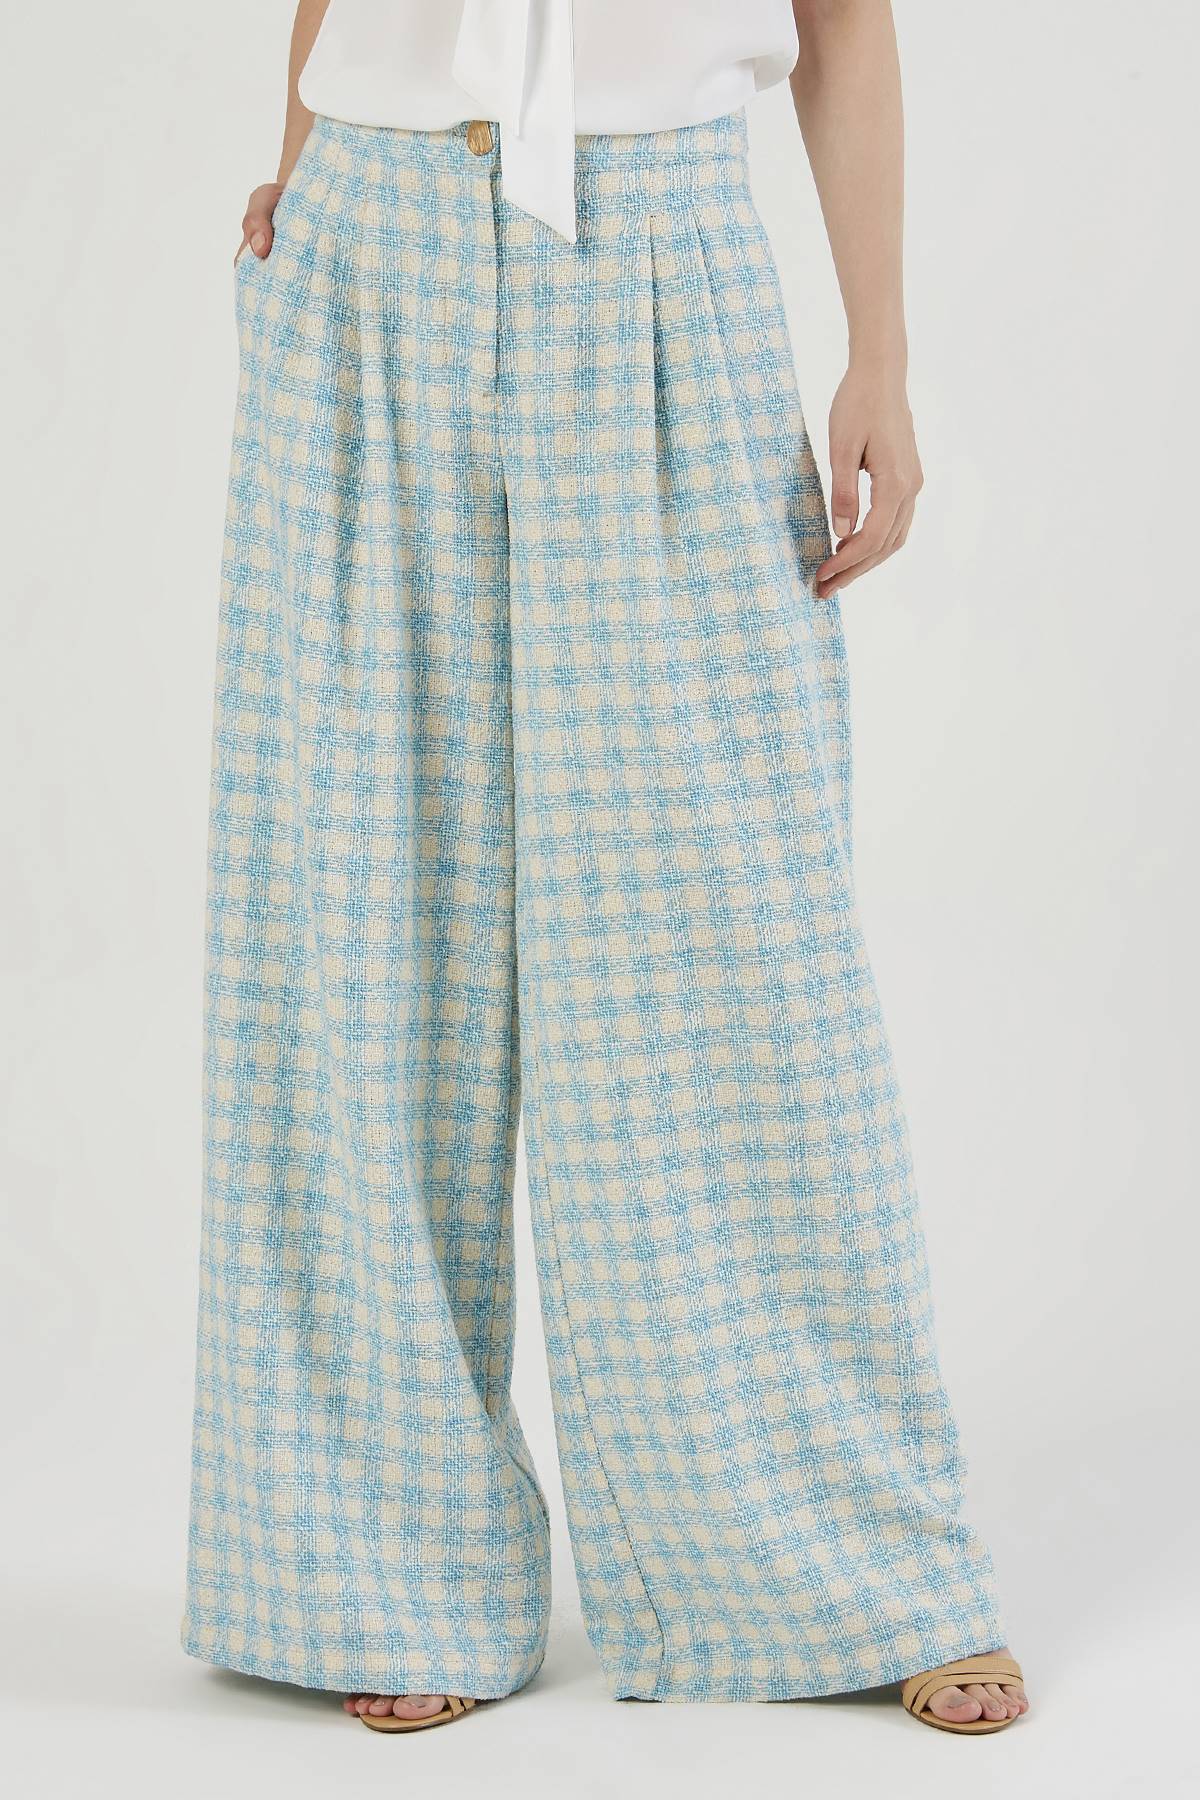 Turquoise Plaid Wide Leg Trousers